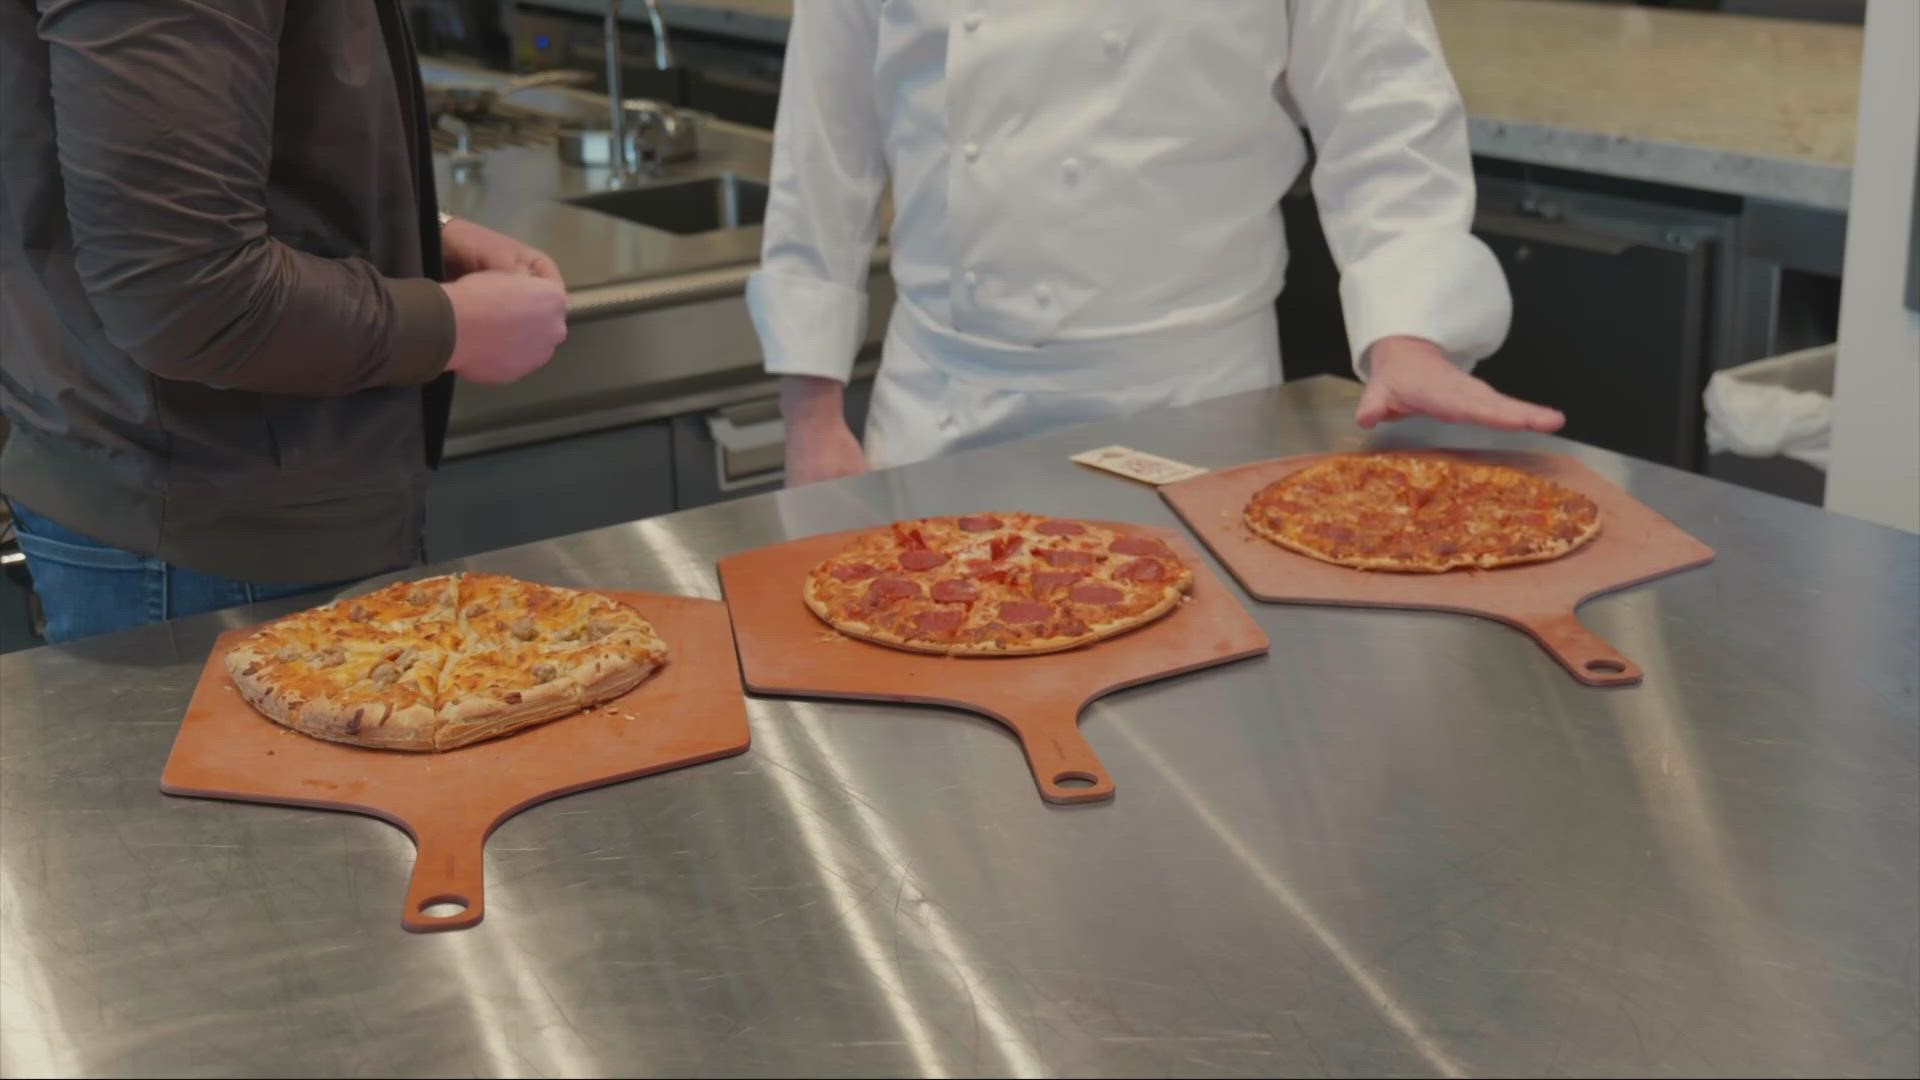 We take our Mission Possible series into the Nestlé test kitchen to uncover the next frozen pizza creation from DiGiornio coming soon to a grocery store near you.